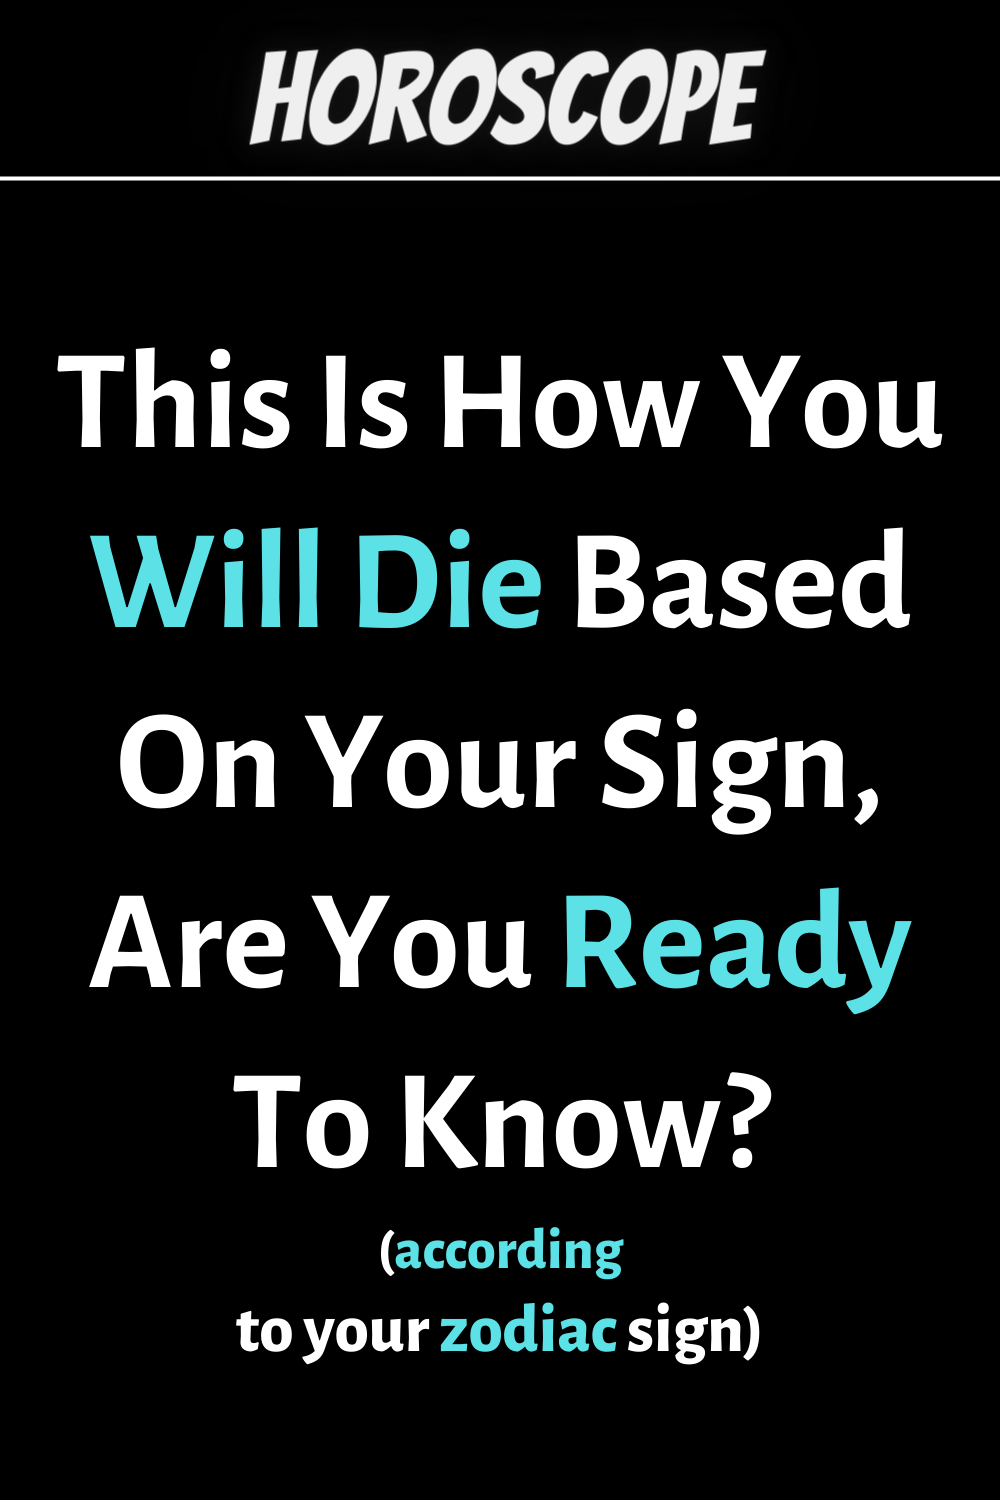 This Is How You Will Die Based On Your Zodiac Sign, Are You Ready To Know?